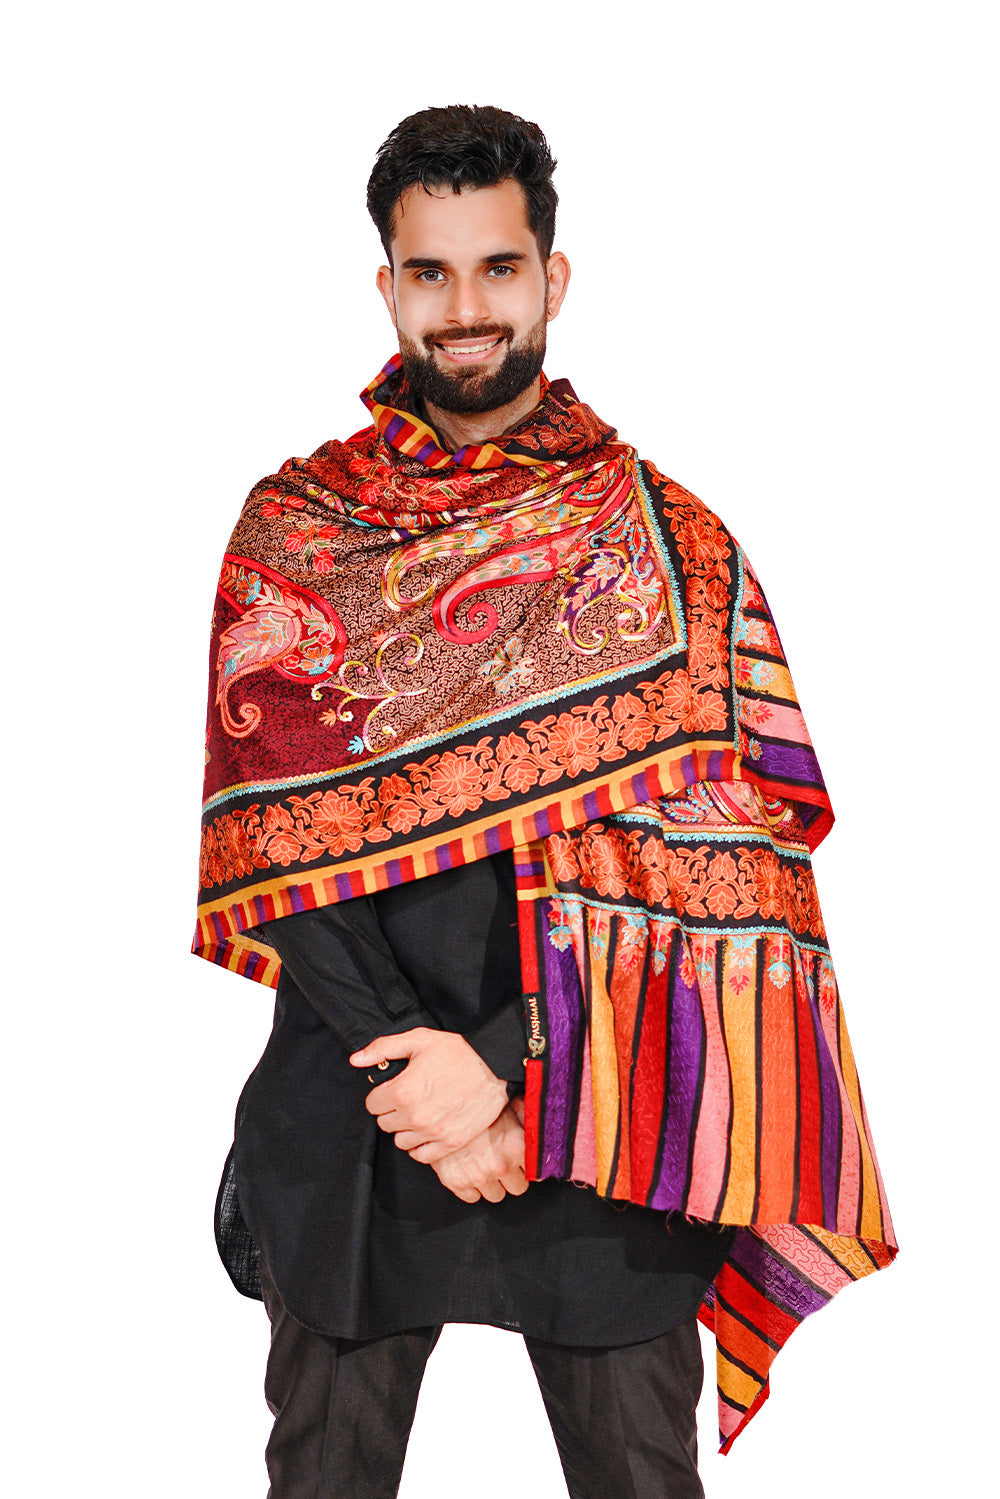 Men's Wool Shawl with Exquisite Aari Embroidery - Scarlet Red